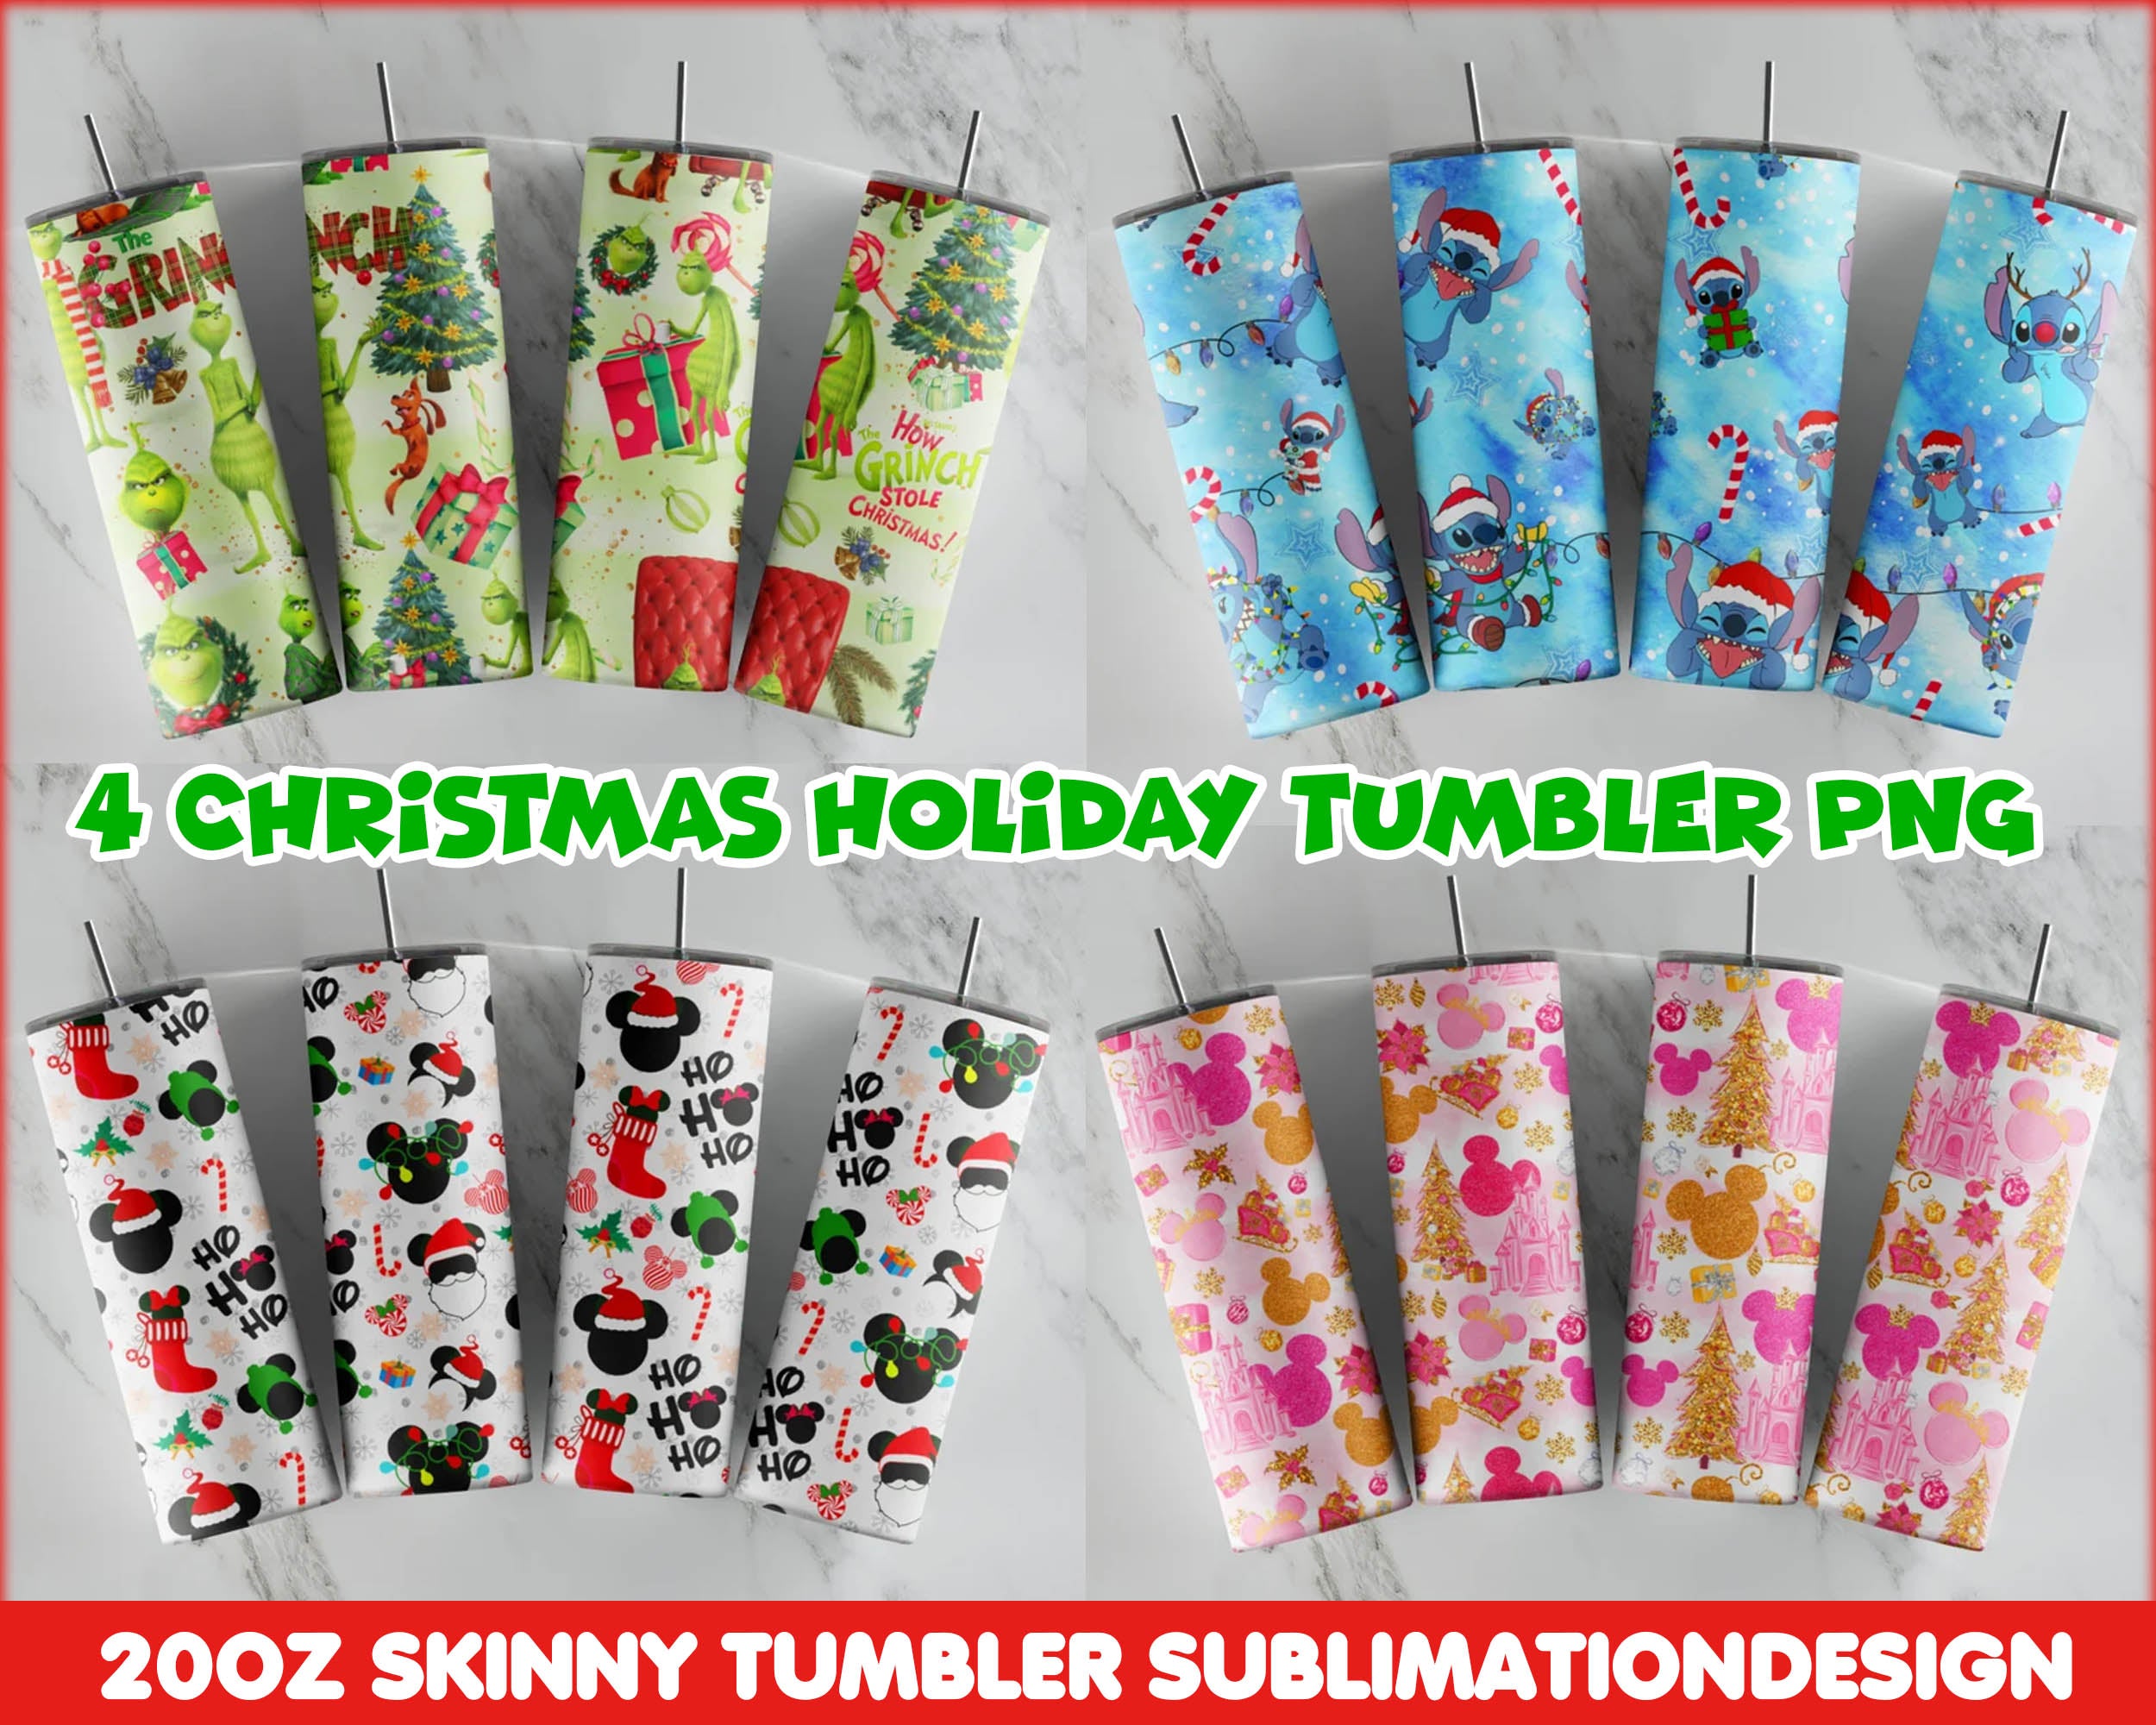 4 Christmas Holiday Tumbler, 20oz Skinny Tumbler Sublimation Designs, Christmas Straight Tumbler Wrap bundle, PNG, Instant Download  CRM12112202